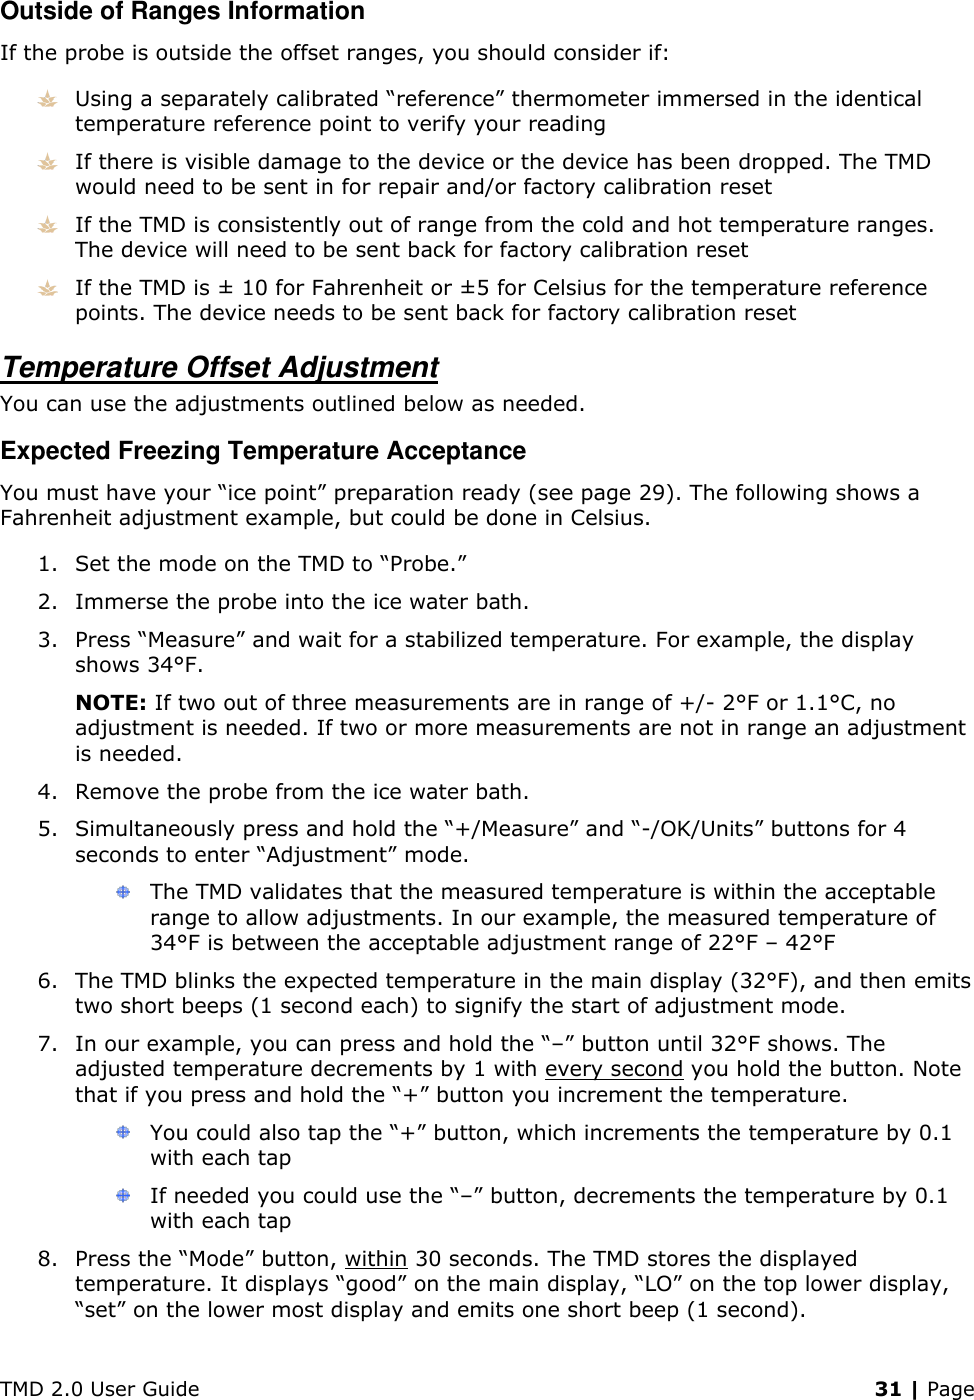 TMD 2.0 User Guide    31 | Page Outside of Ranges Information If the probe is outside the offset ranges, you should consider if:  Using a separately calibrated “reference” thermometer immersed in the identical temperature reference point to verify your reading  If there is visible damage to the device or the device has been dropped. The TMD would need to be sent in for repair and/or factory calibration reset  If the TMD is consistently out of range from the cold and hot temperature ranges. The device will need to be sent back for factory calibration reset  If the TMD is ± 10 for Fahrenheit or ±5 for Celsius for the temperature reference points. The device needs to be sent back for factory calibration reset Temperature Offset Adjustment You can use the adjustments outlined below as needed. Expected Freezing Temperature Acceptance You must have your “ice point” preparation ready (see page 29). The following shows a Fahrenheit adjustment example, but could be done in Celsius. 1. Set the mode on the TMD to “Probe.” 2. Immerse the probe into the ice water bath. 3. Press “Measure” and wait for a stabilized temperature. For example, the display shows 34°F. NOTE: If two out of three measurements are in range of +/- 2°F or 1.1°C, no adjustment is needed. If two or more measurements are not in range an adjustment is needed. 4. Remove the probe from the ice water bath. 5. Simultaneously press and hold the “+/Measure” and “-/OK/Units” buttons for 4 seconds to enter “Adjustment” mode.  The TMD validates that the measured temperature is within the acceptable range to allow adjustments. In our example, the measured temperature of 34°F is between the acceptable adjustment range of 22°F – 42°F 6. The TMD blinks the expected temperature in the main display (32°F), and then emits two short beeps (1 second each) to signify the start of adjustment mode. 7. In our example, you can press and hold the “–” button until 32°F shows. The adjusted temperature decrements by 1 with every second you hold the button. Note that if you press and hold the “+” button you increment the temperature.  You could also tap the “+” button, which increments the temperature by 0.1 with each tap  If needed you could use the “–” button, decrements the temperature by 0.1 with each tap 8. Press the “Mode” button, within 30 seconds. The TMD stores the displayed temperature. It displays “good” on the main display, “LO” on the top lower display, “set” on the lower most display and emits one short beep (1 second). 